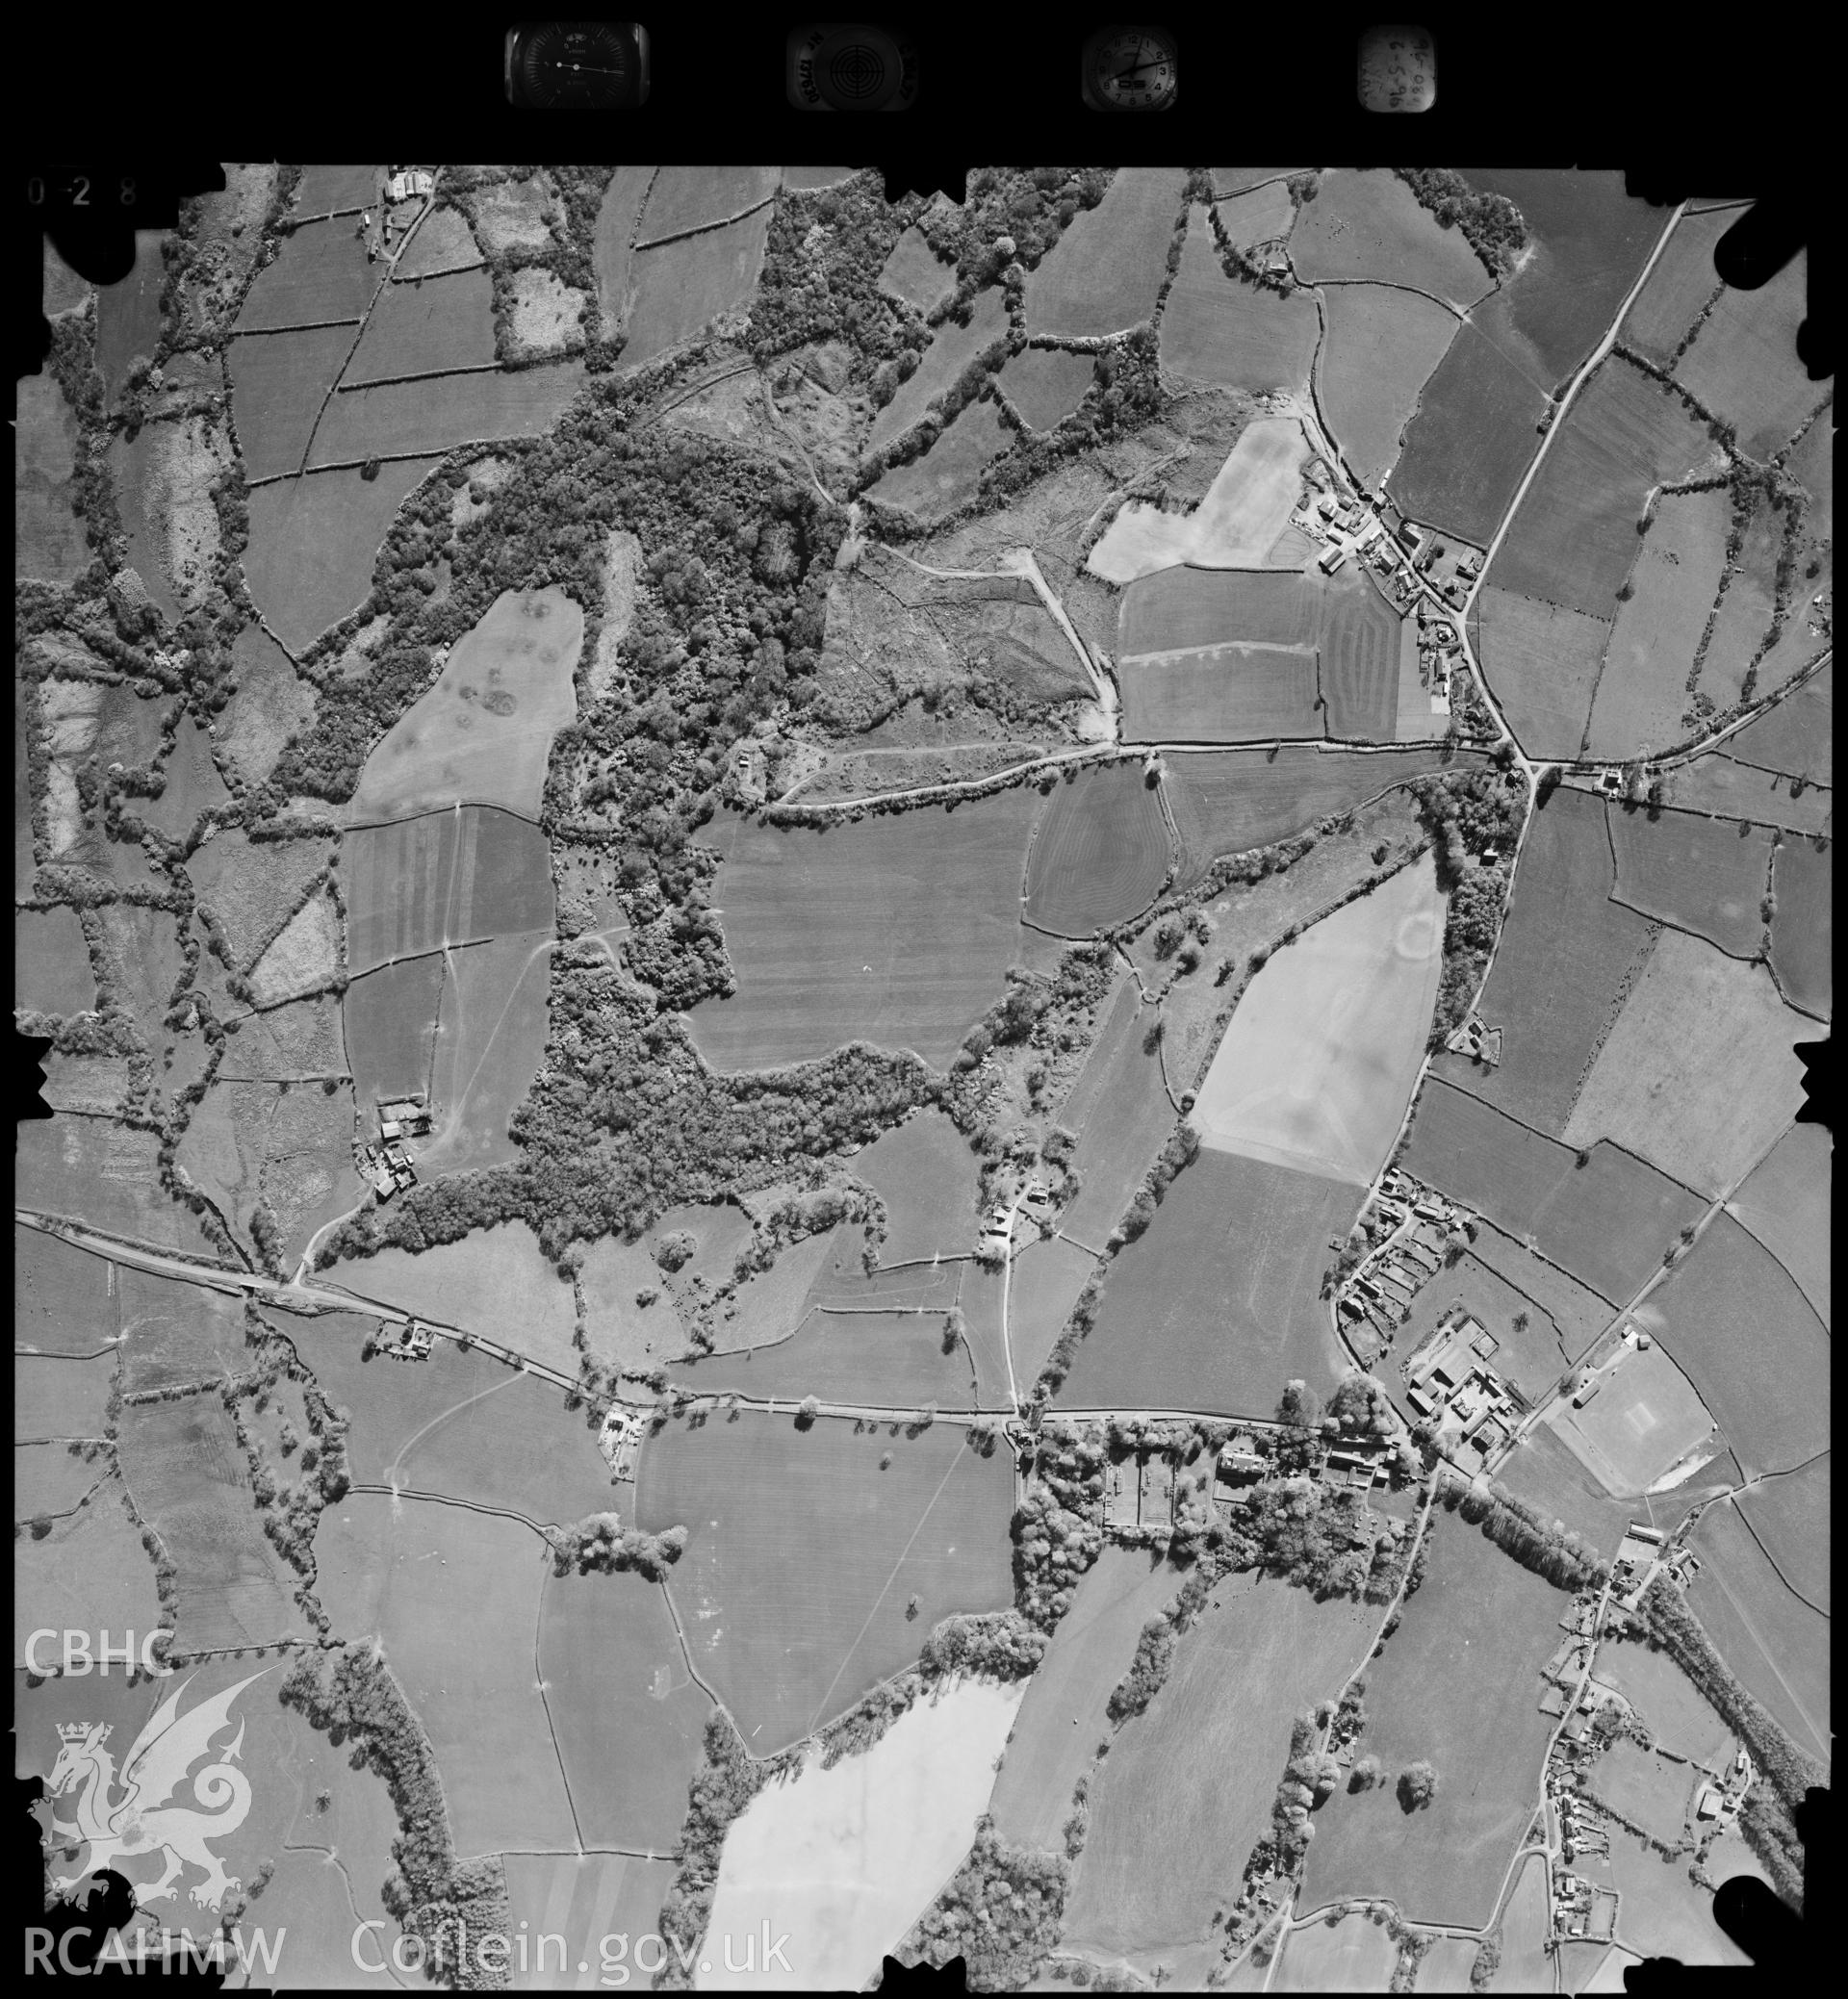 Digitized copy of an aerial photograph showing the Cresselly area,  taken by Ordnance Survey, 1996